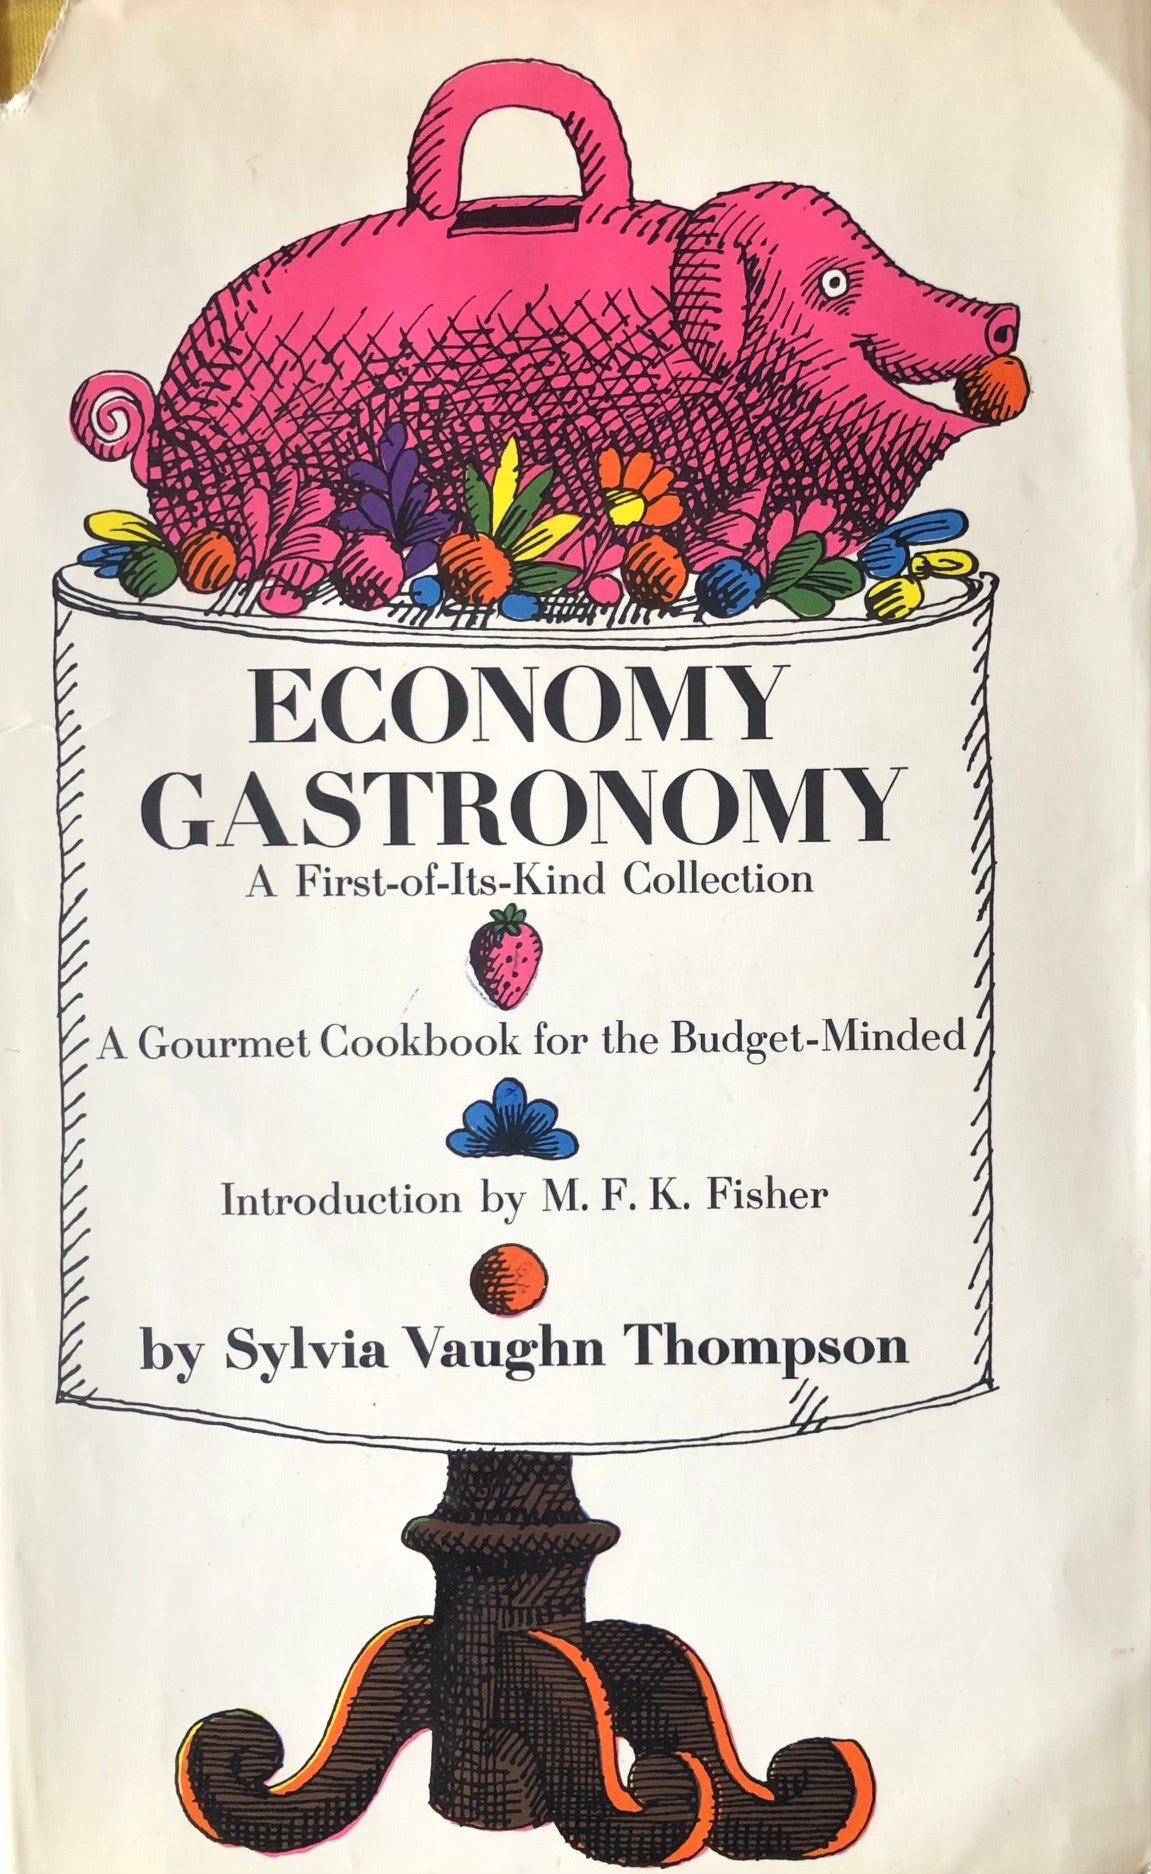 (Economy) Sylvia Vaughn Thompson. Economy Gastronomy: A Gourmet Cookbook for the Budget-Minded. Intro. by M.F.K. Fisher.